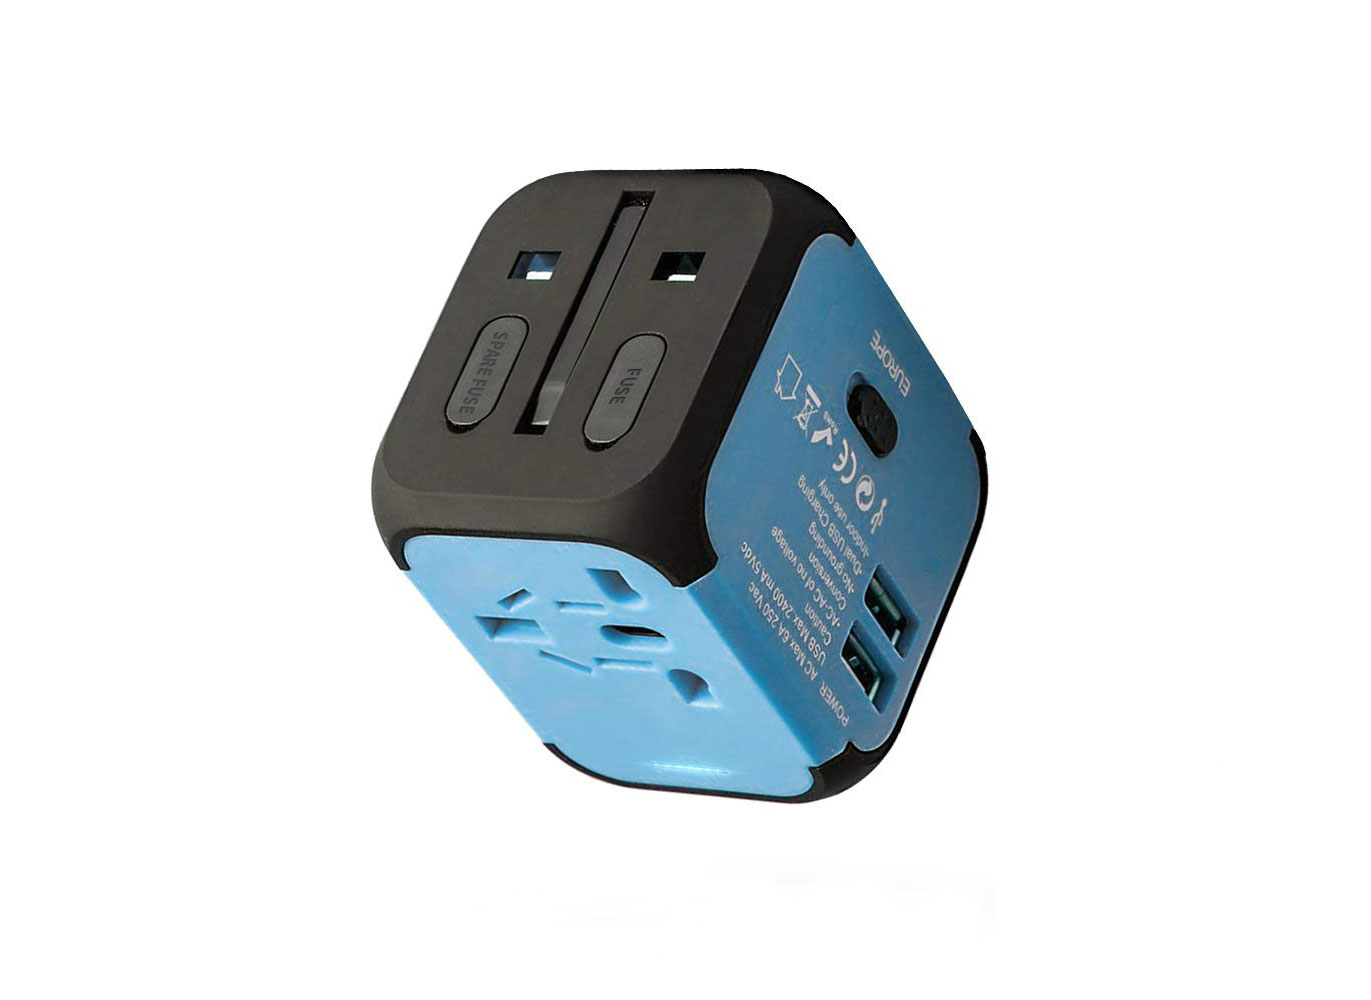 All-in-one Worldwide Travel Adapter on Amazon